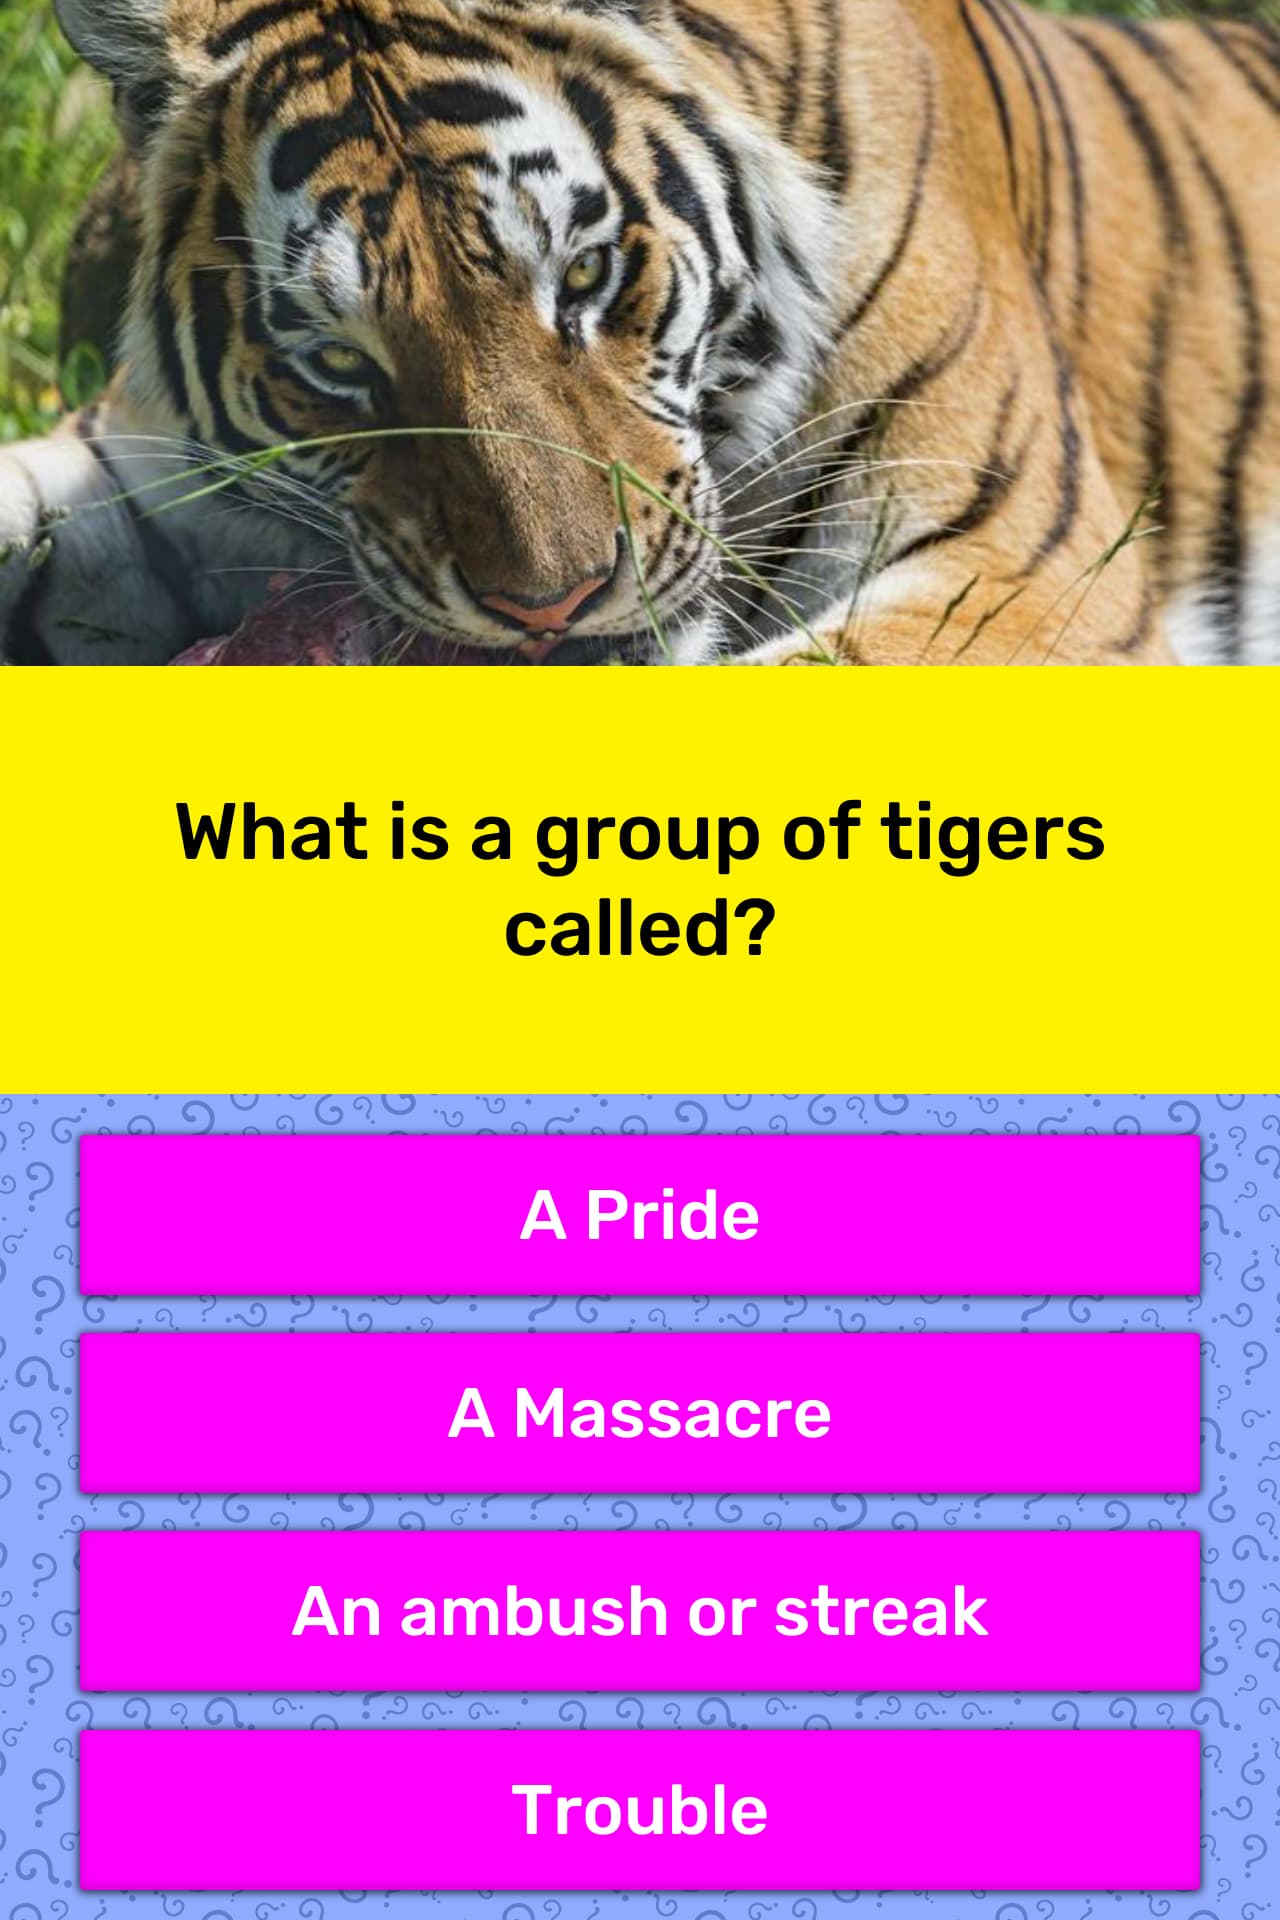 What is a group of tigers called?